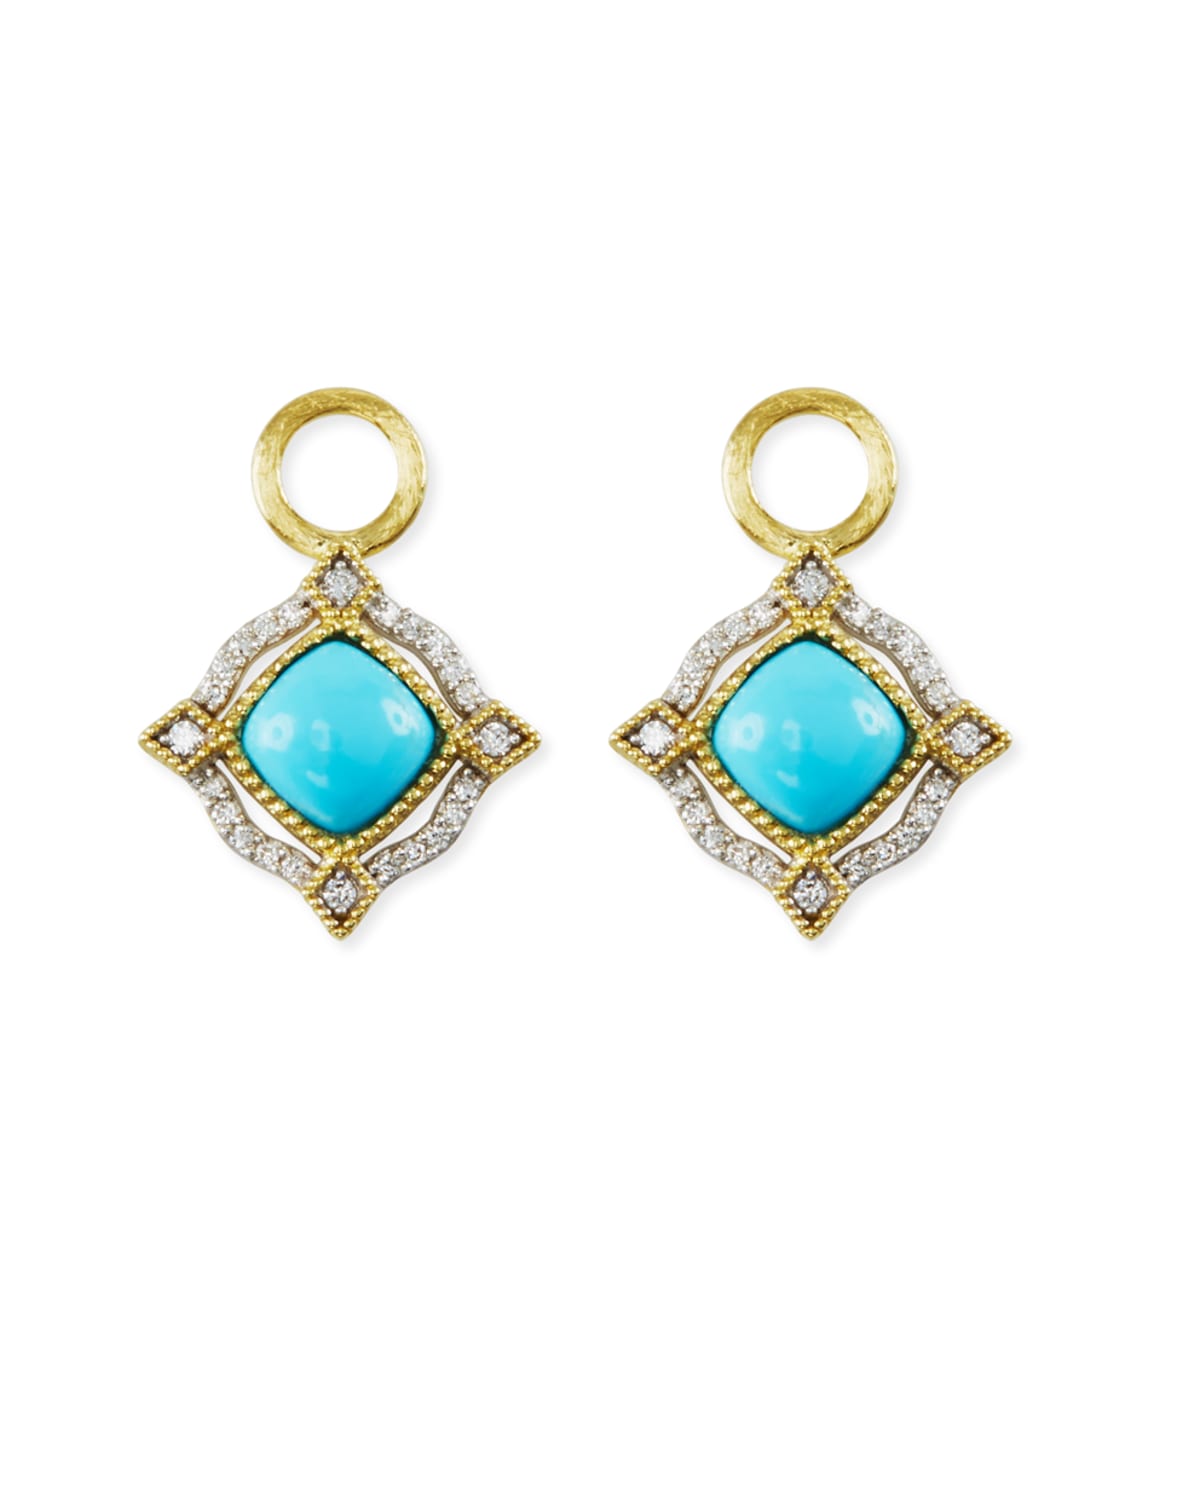 Jude Frances Lisse 18k Delicate Cushion Turquoise Earring Charms With Diamonds